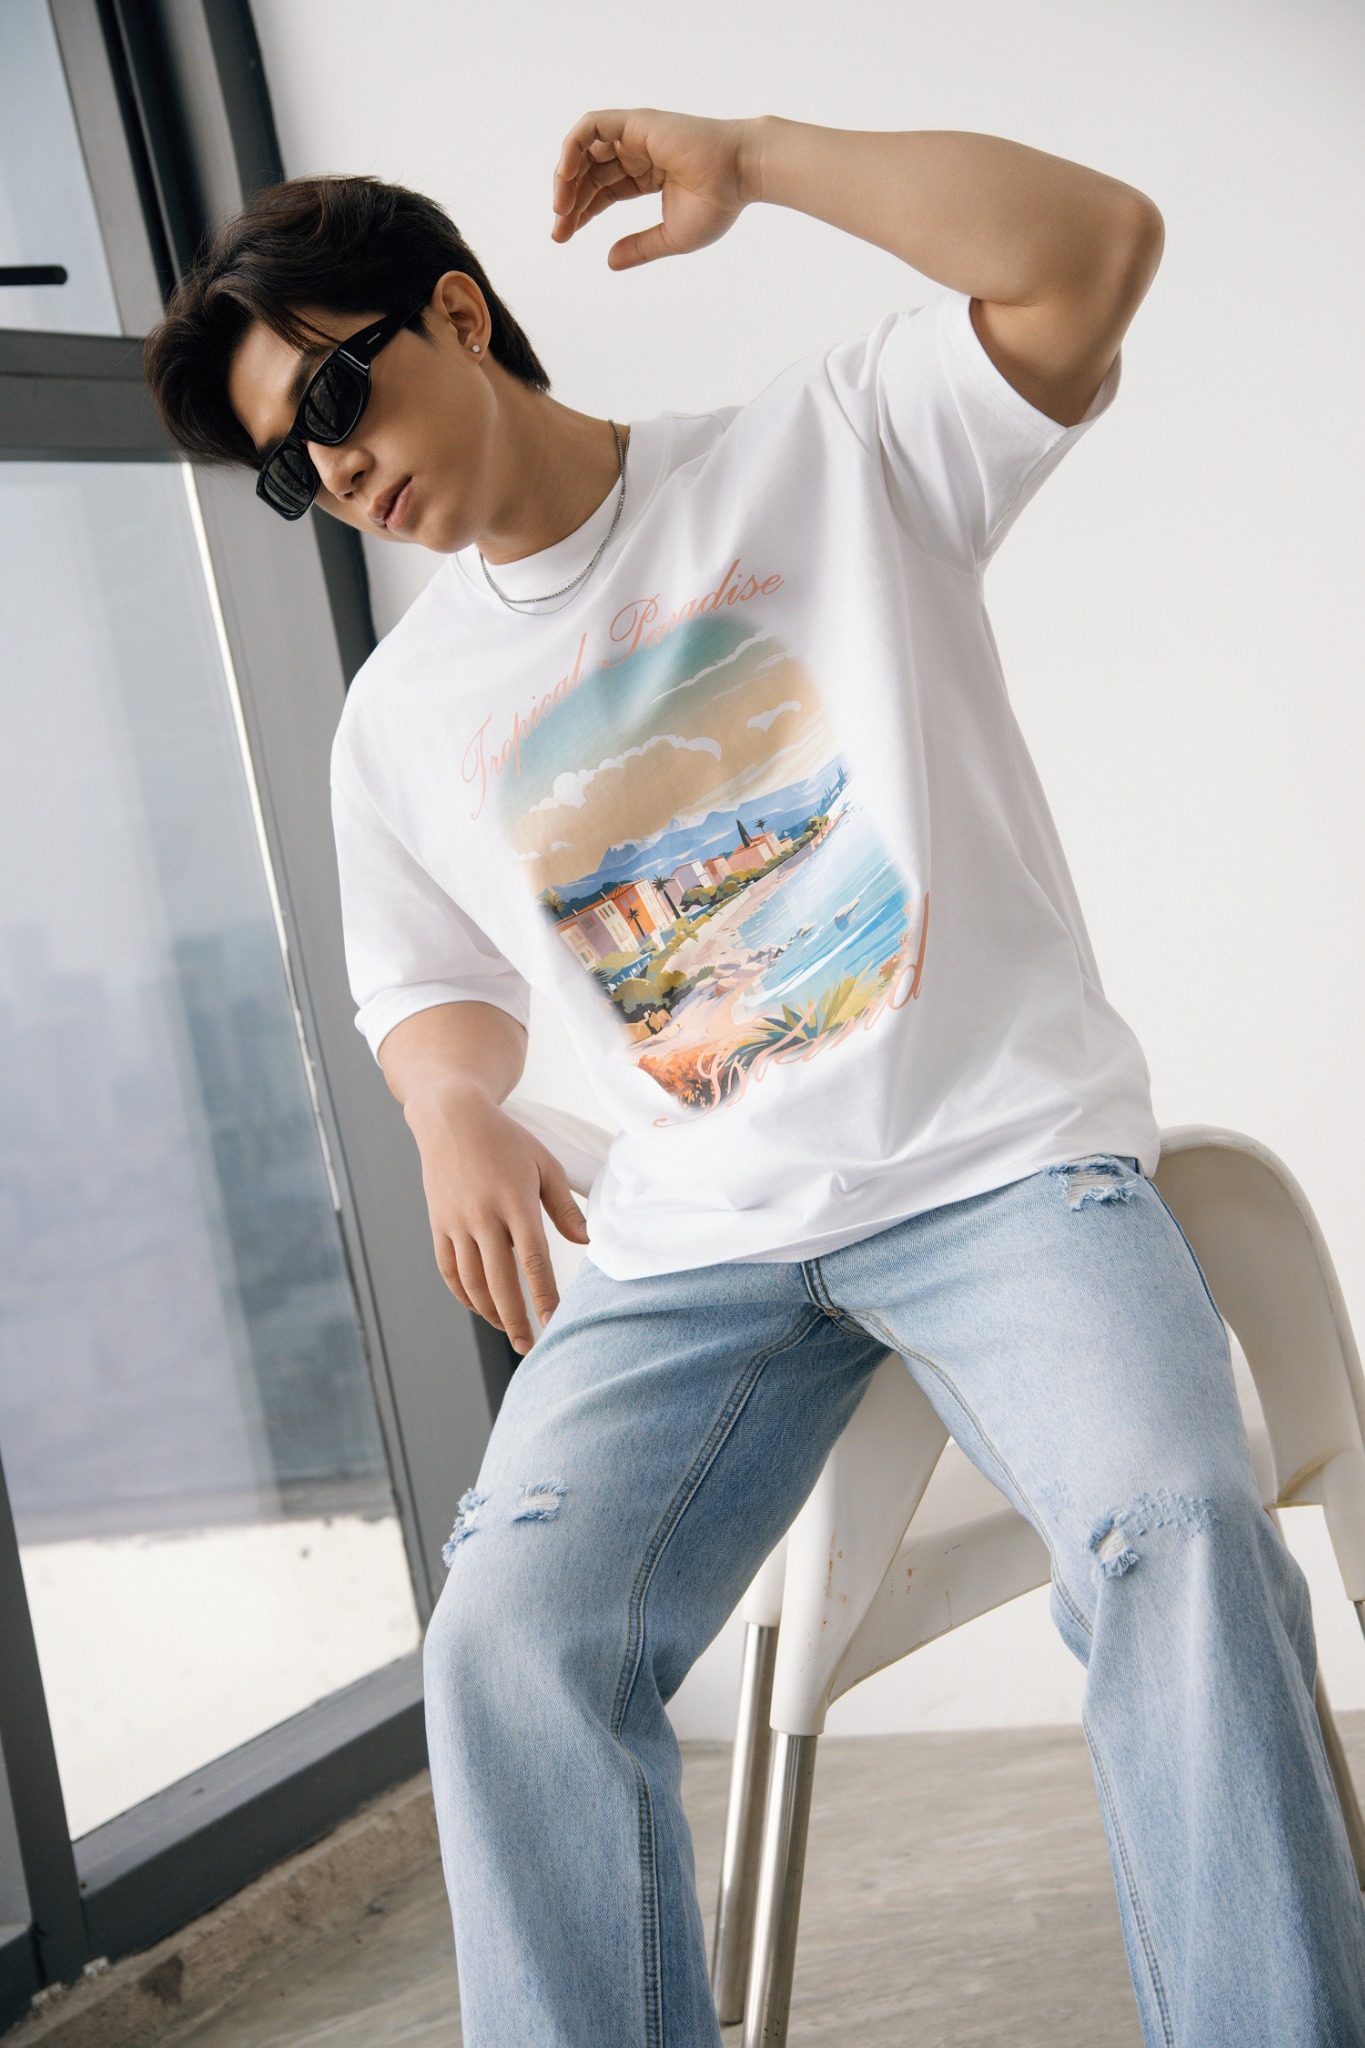 AG695 FACTORY OVERSIZE NEW PRINTED "TROPICAL PARADISE" T-SHIRT - WHITE